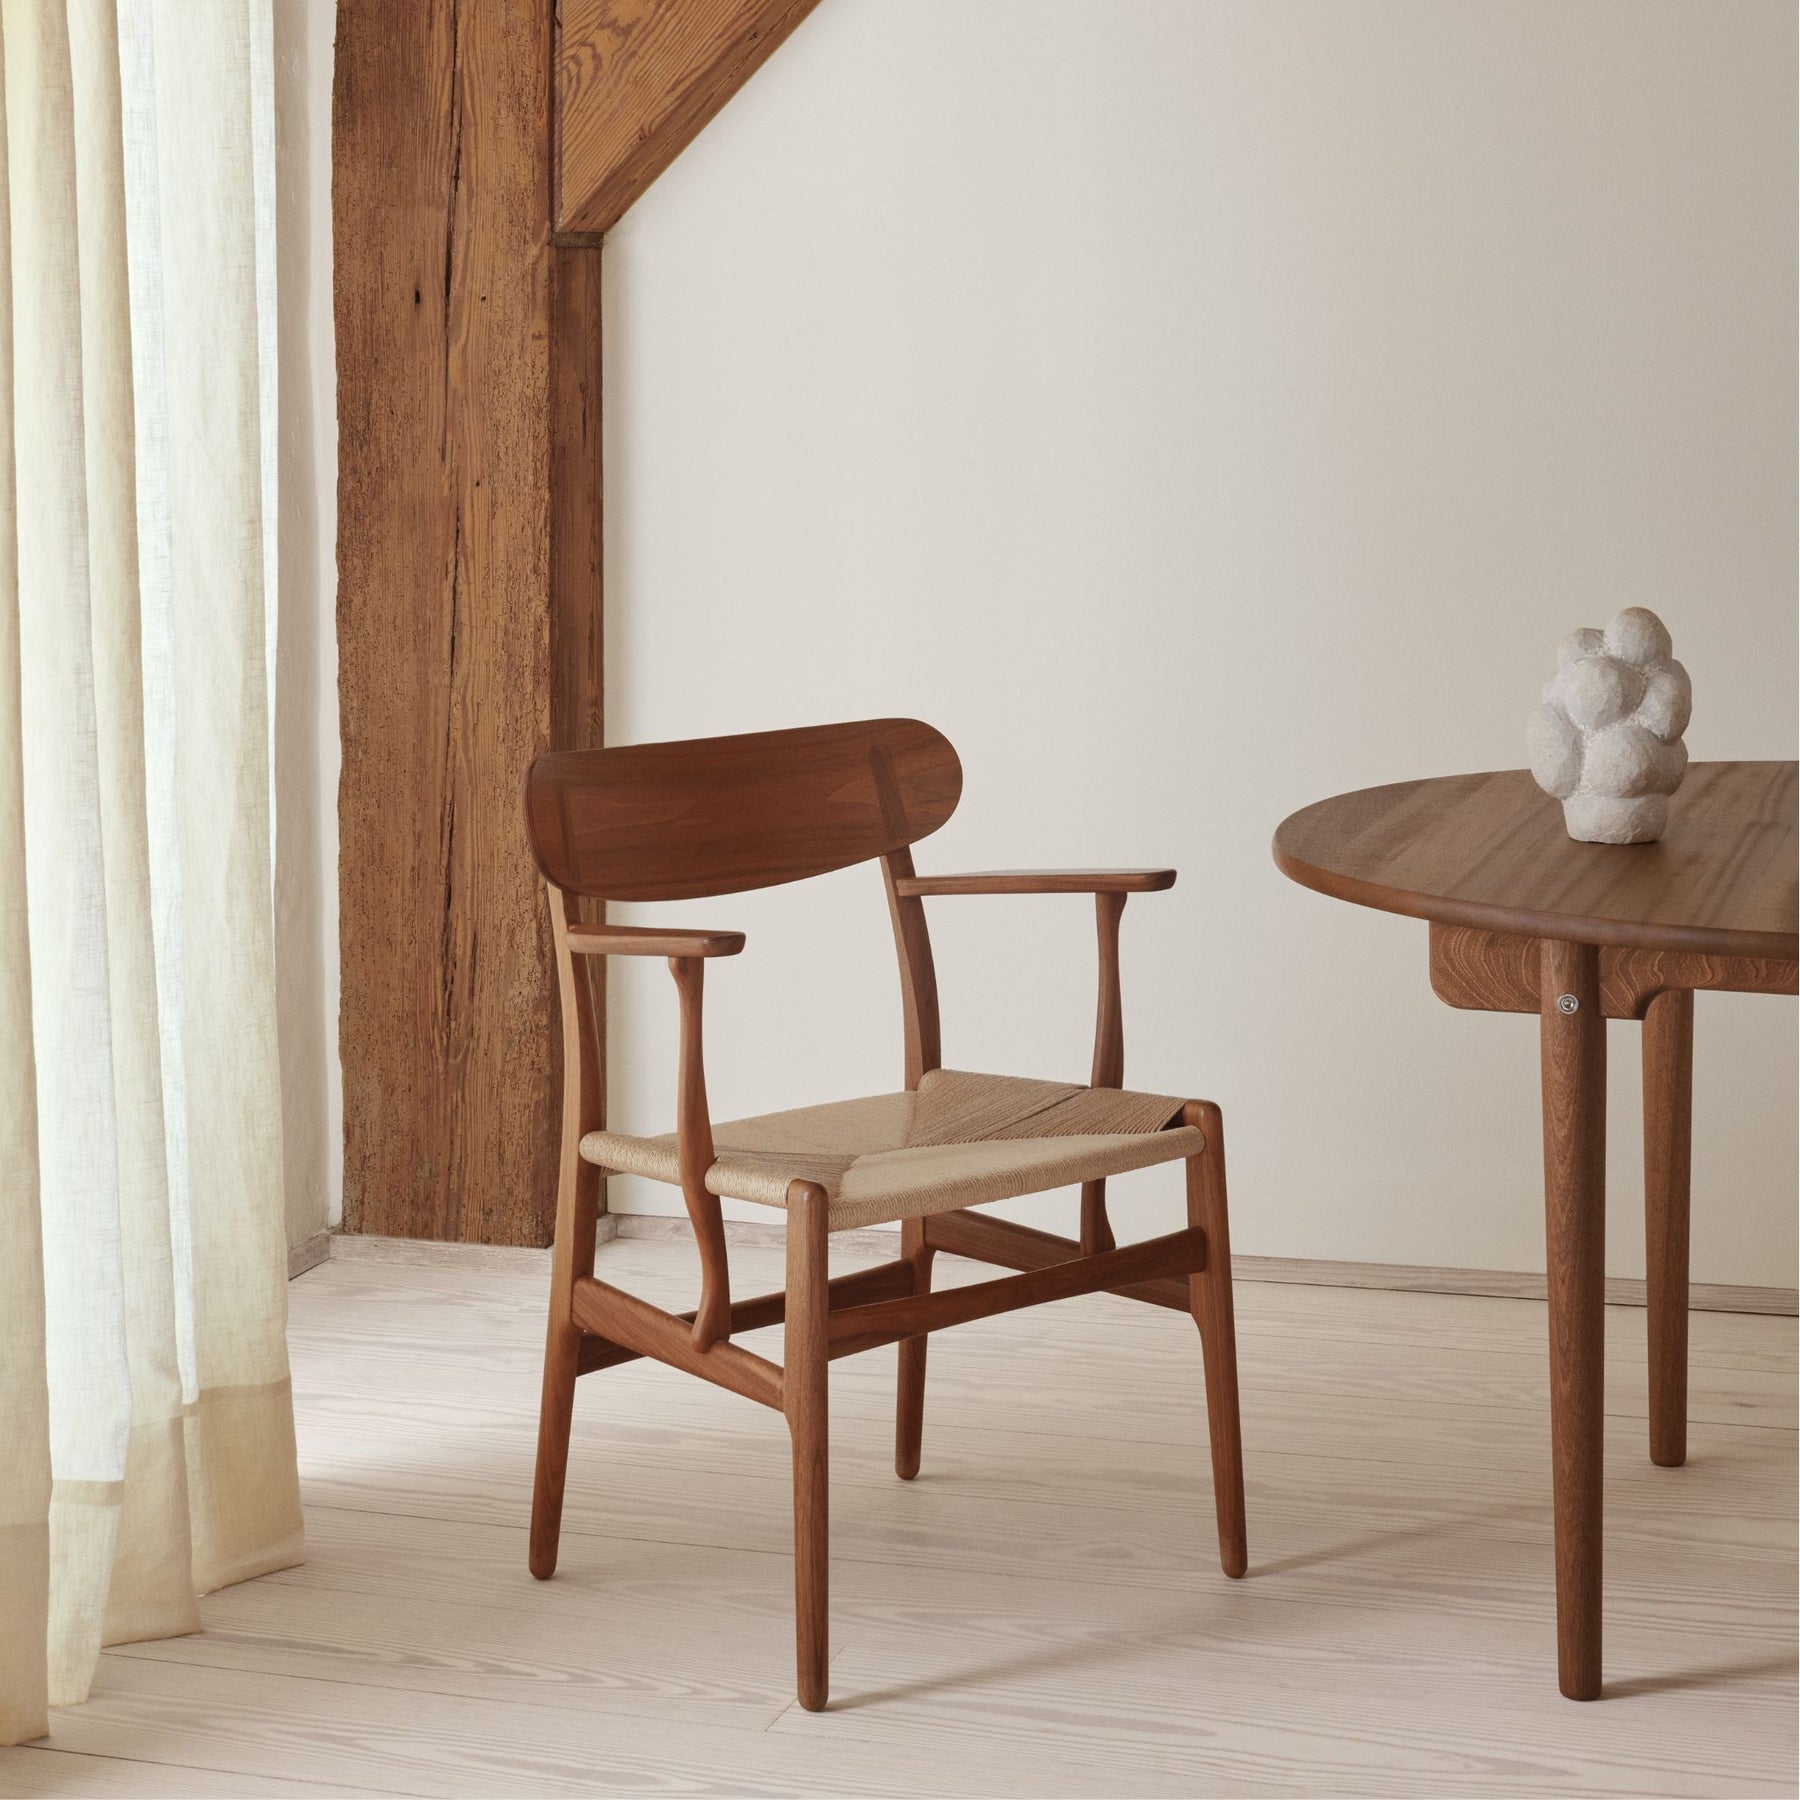 Carl Hansen CH338 Dining Table Mahogany with CH26 Dining Chair